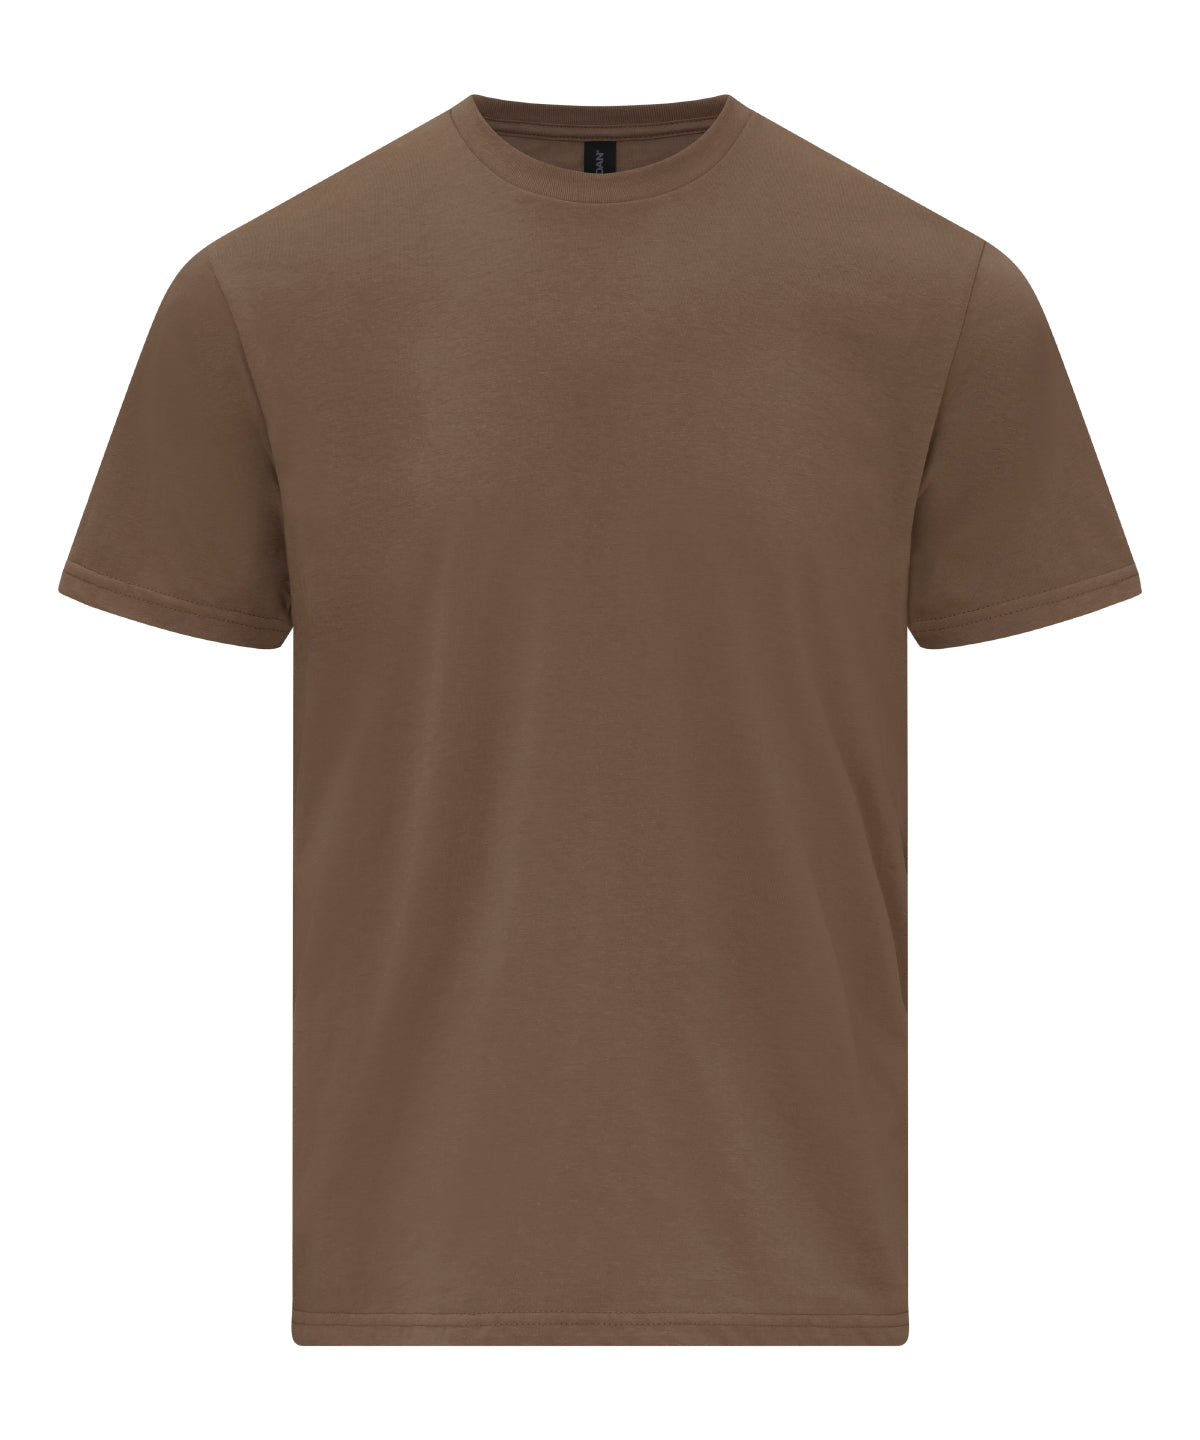 Personalised T-Shirts - Dark Brown Gildan Softstyle™ midweight adult t-shirt